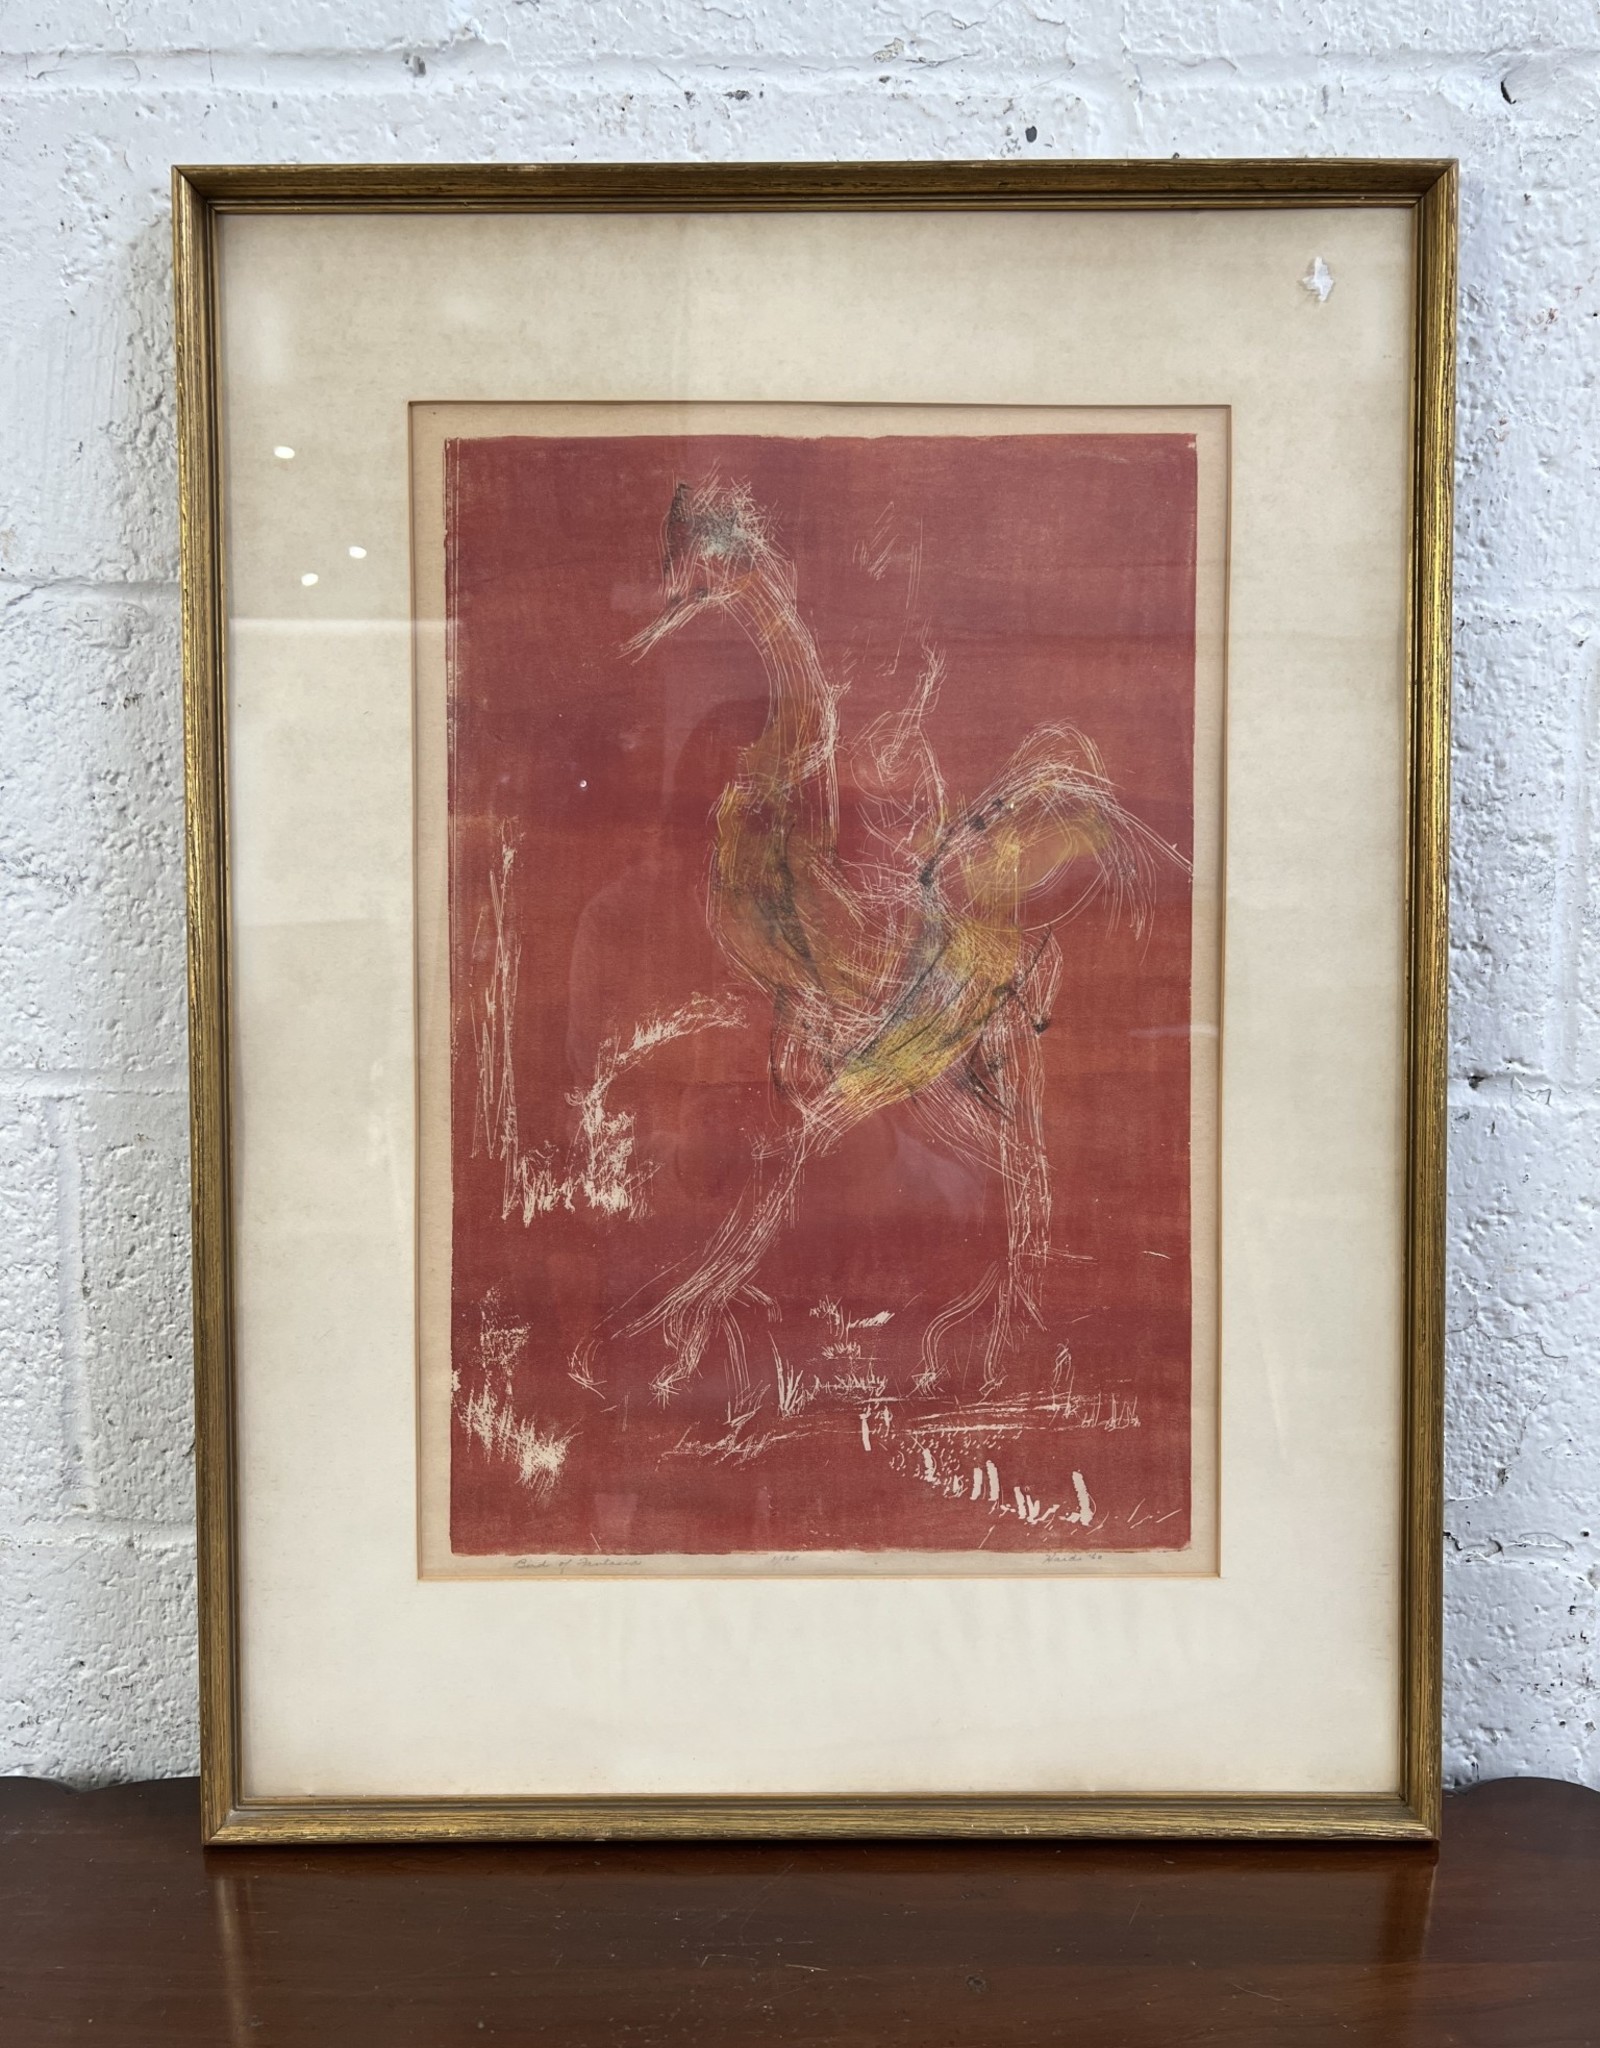 Bird of Fantasia, color lithograph on paper, sgnd Sara Haid